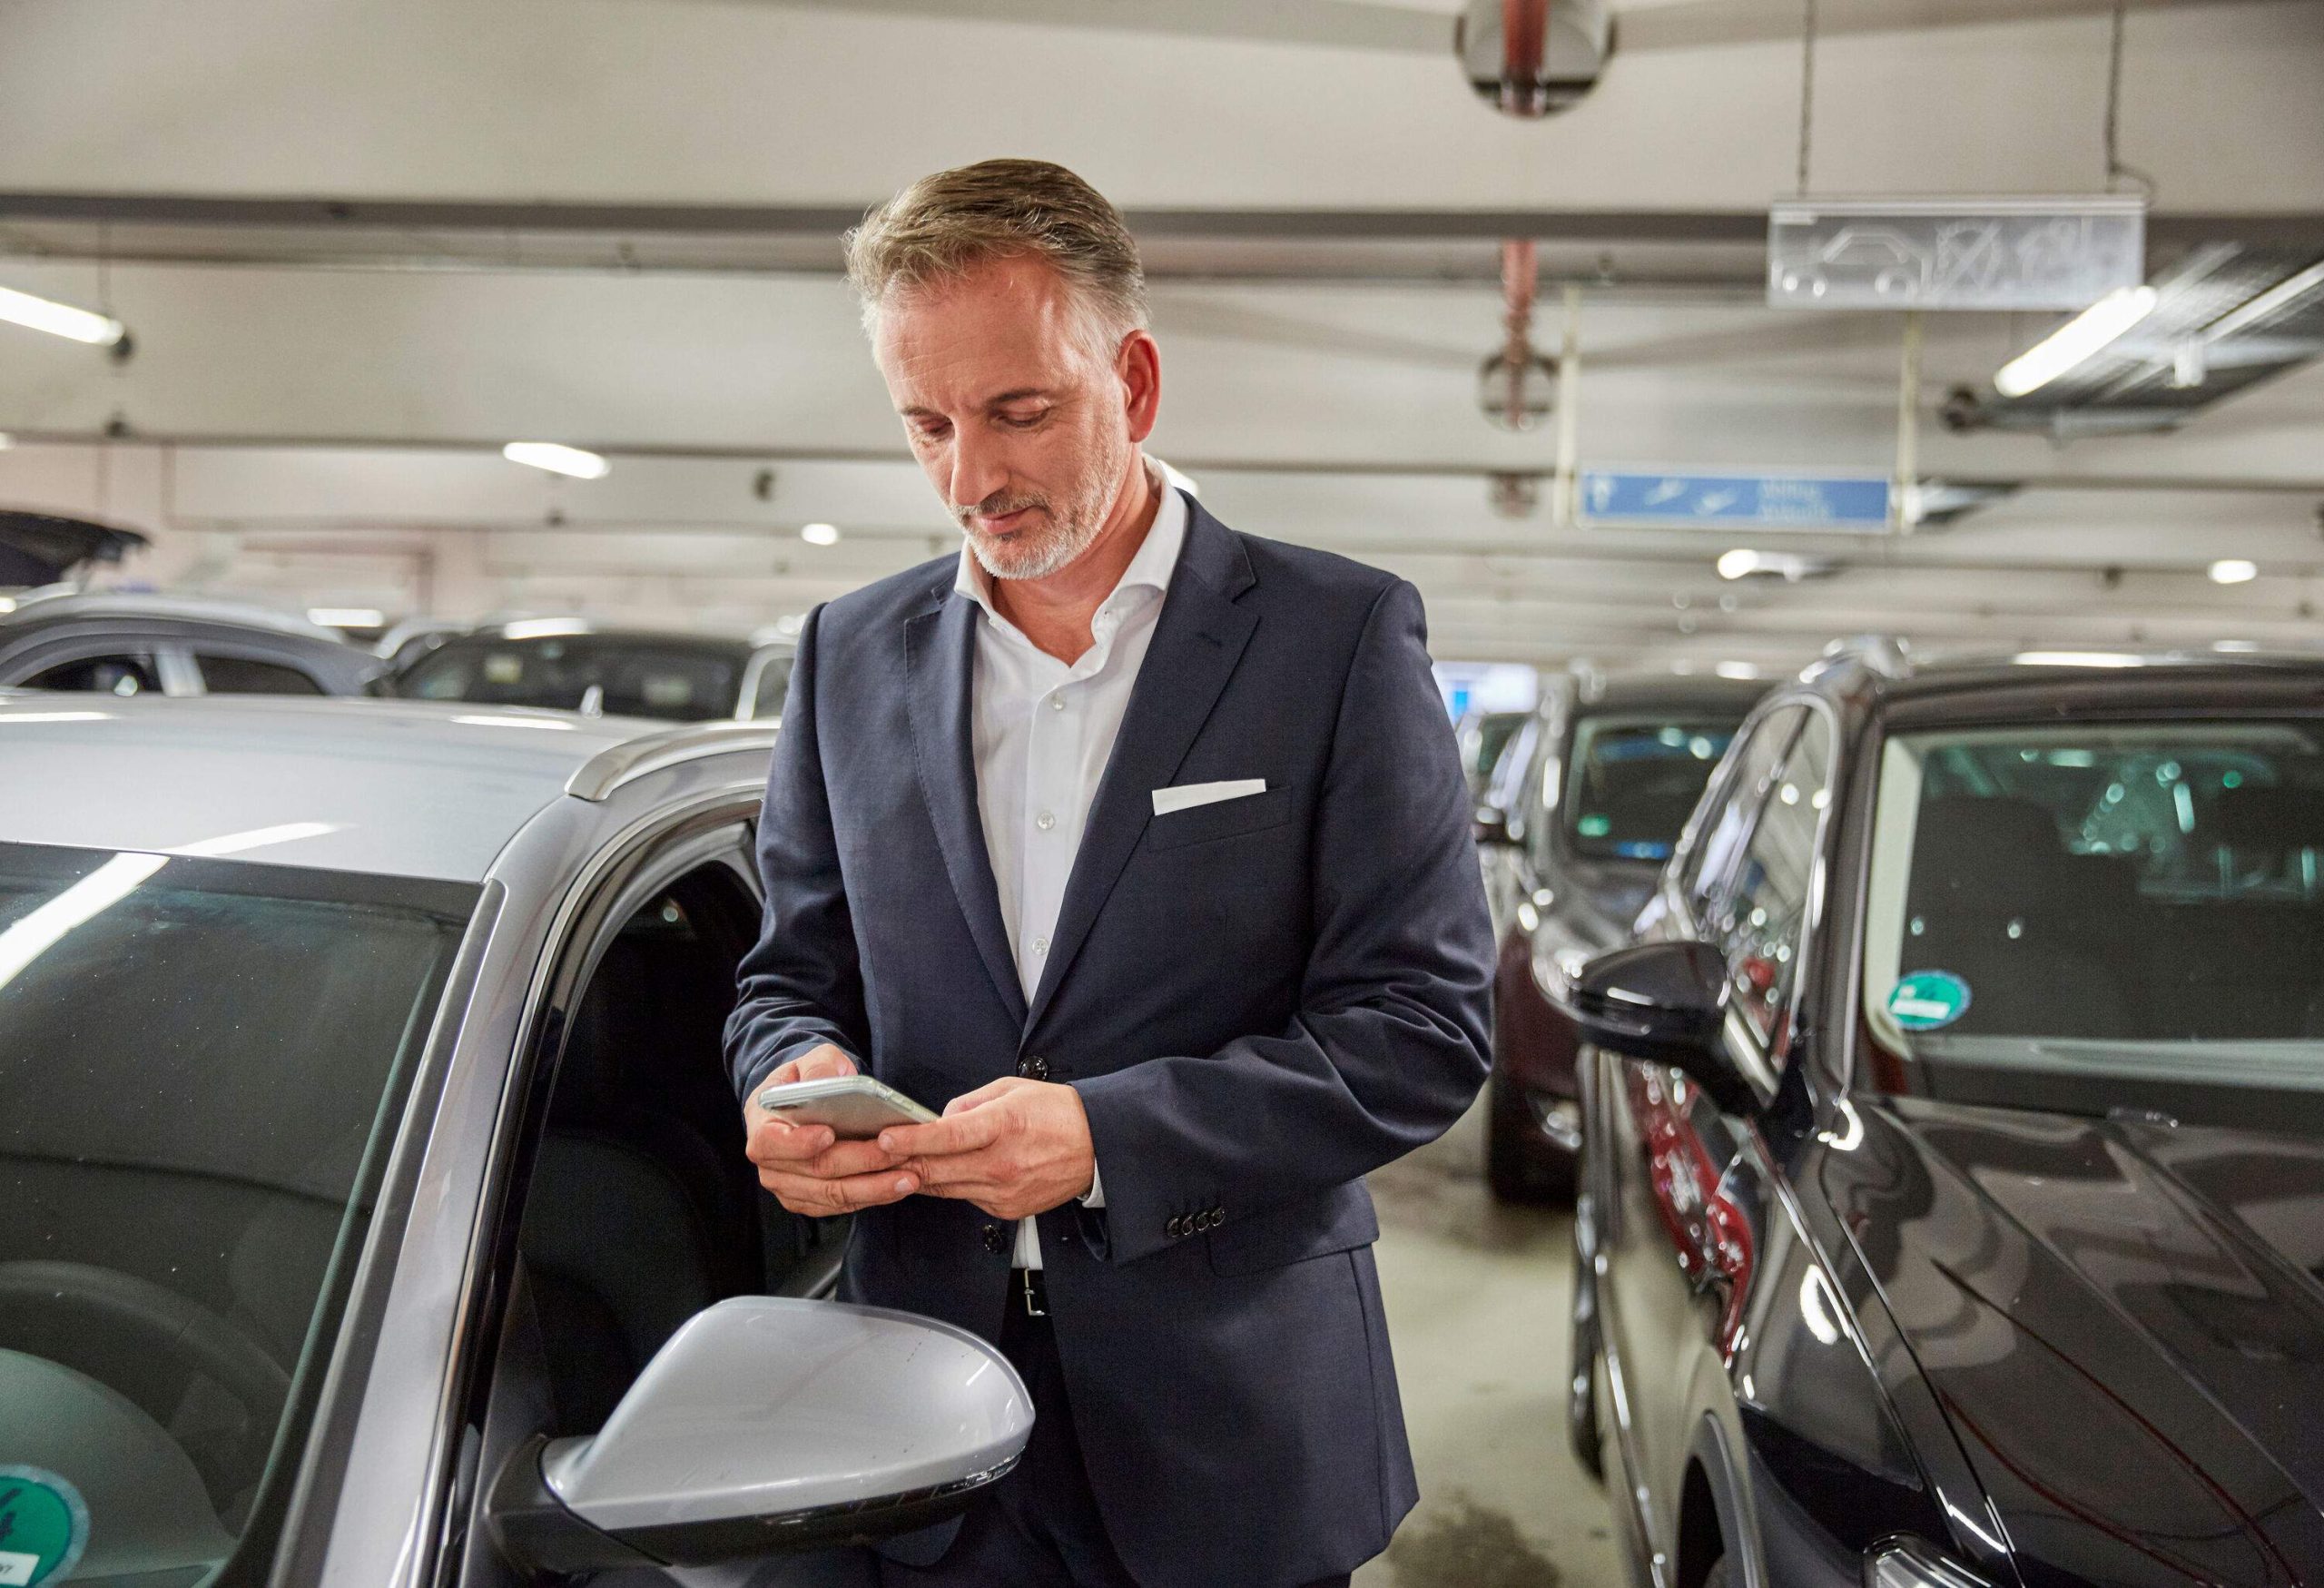 A person dressed in corporate attire stands beside a pristine white car, engrossed in their smartphone, amidst the ambiance of an underground parking area.